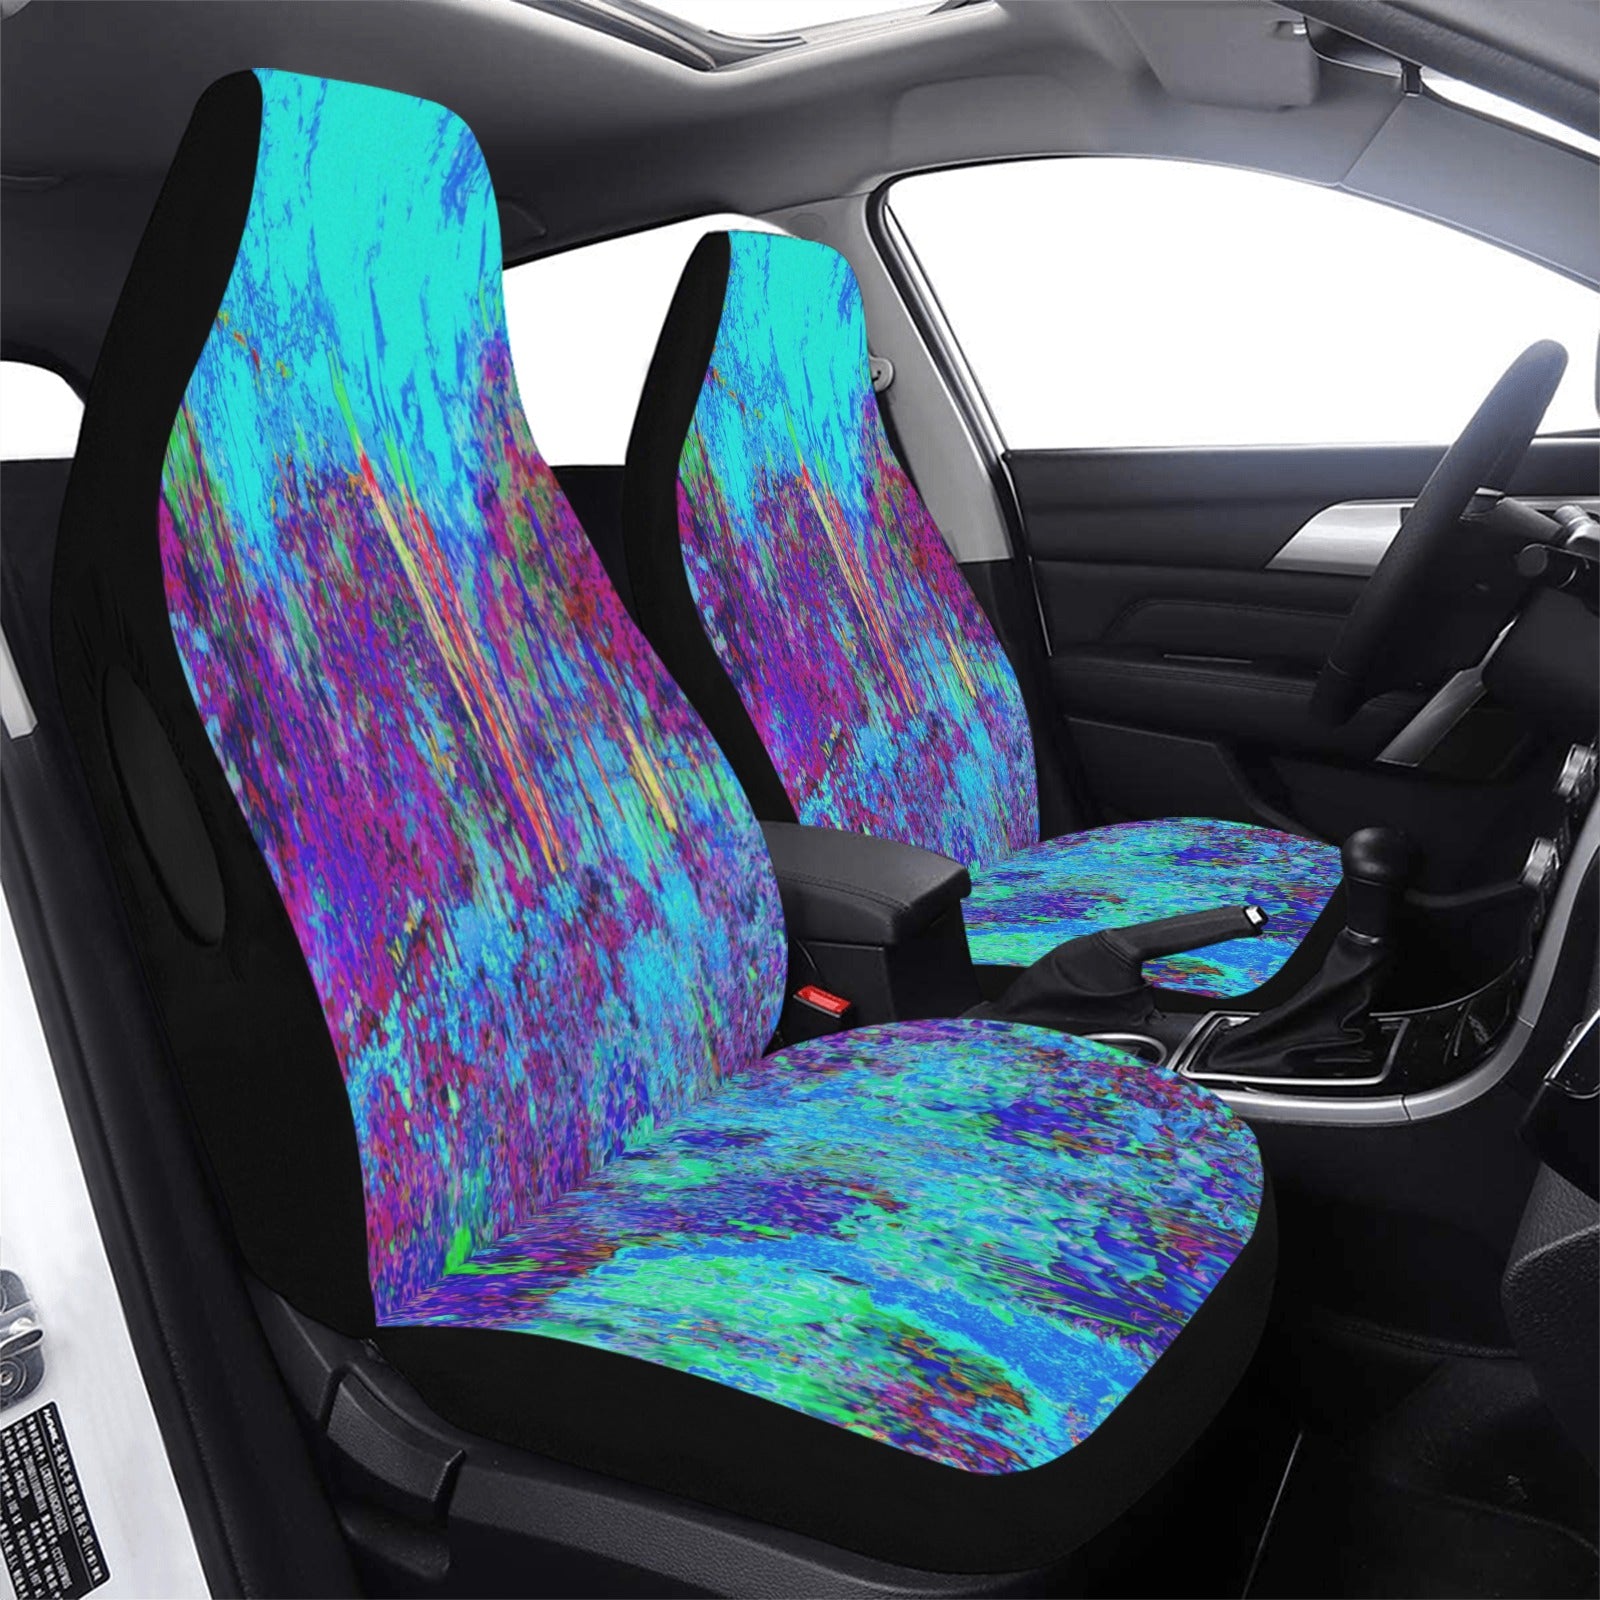 Car Seat Covers, Psychedelic Impressionistic Blue Garden Landscape